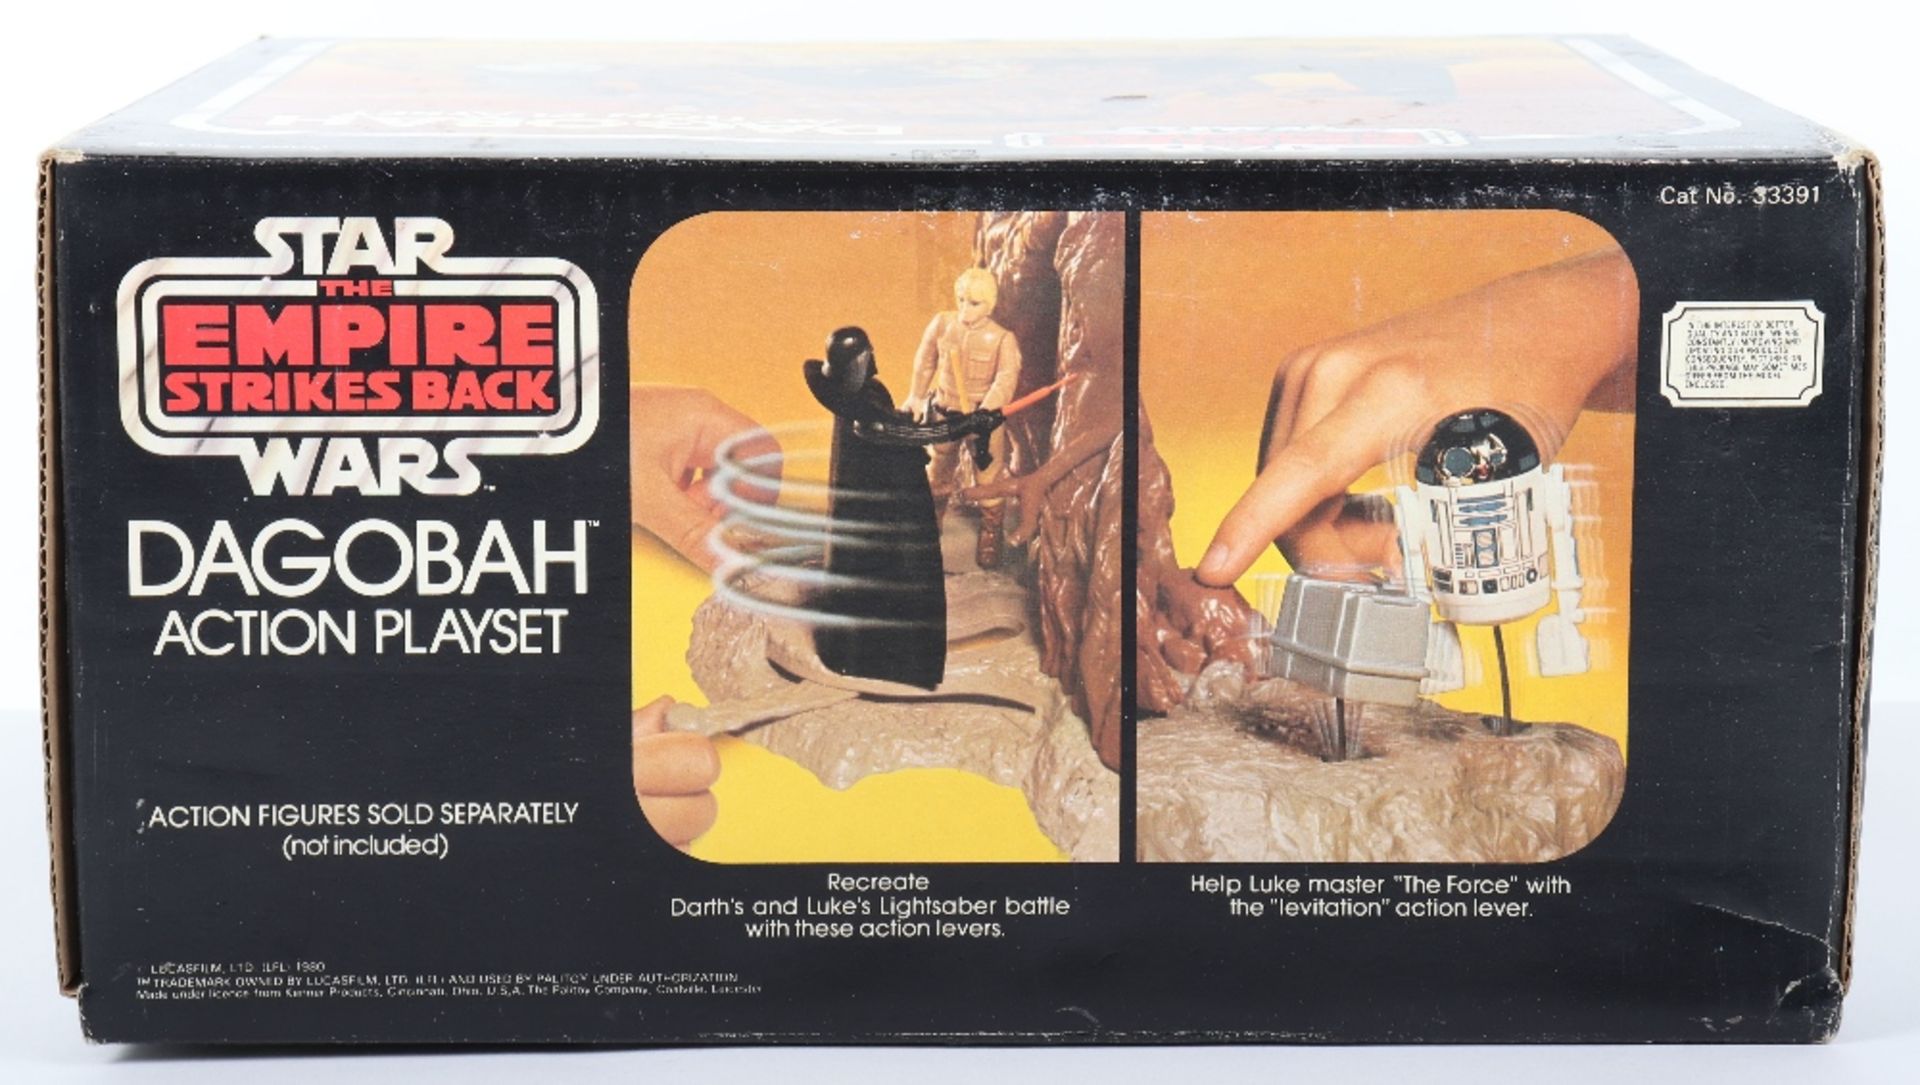 Boxed Palitoy Star Wars The Empire Strikes Back Dagobah Action Playset - Image 10 of 13